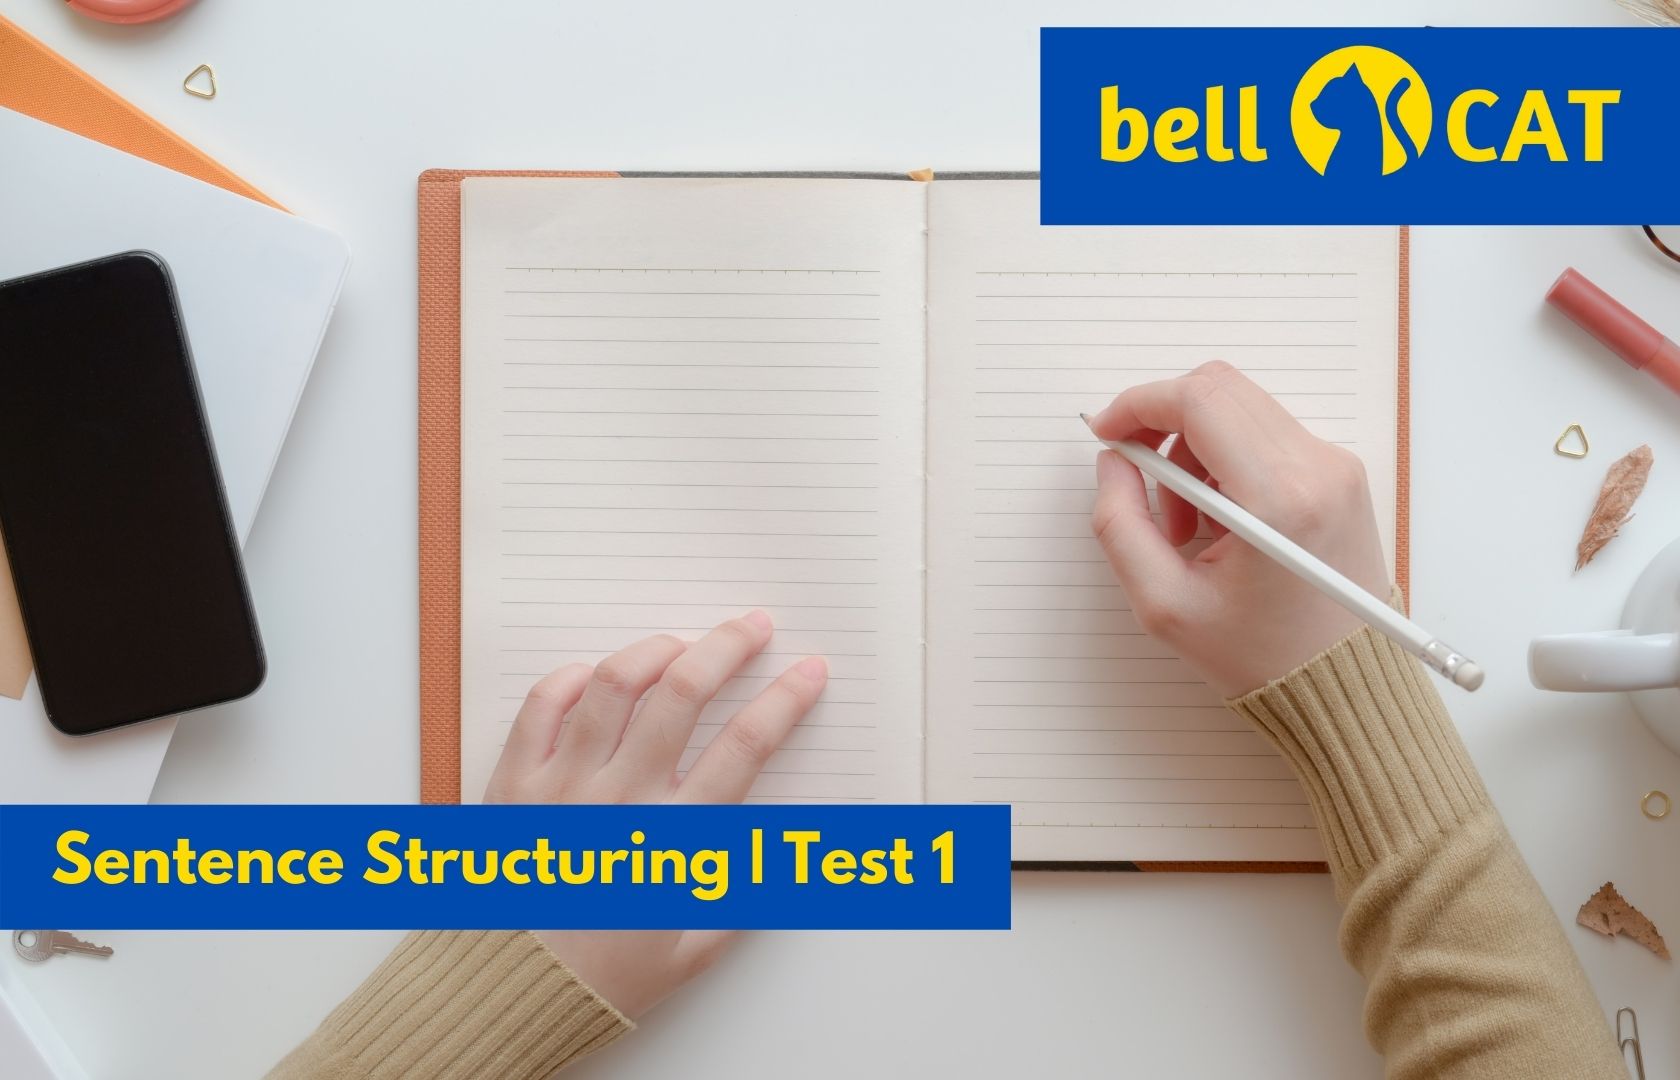 Sentence Structuring Test 1